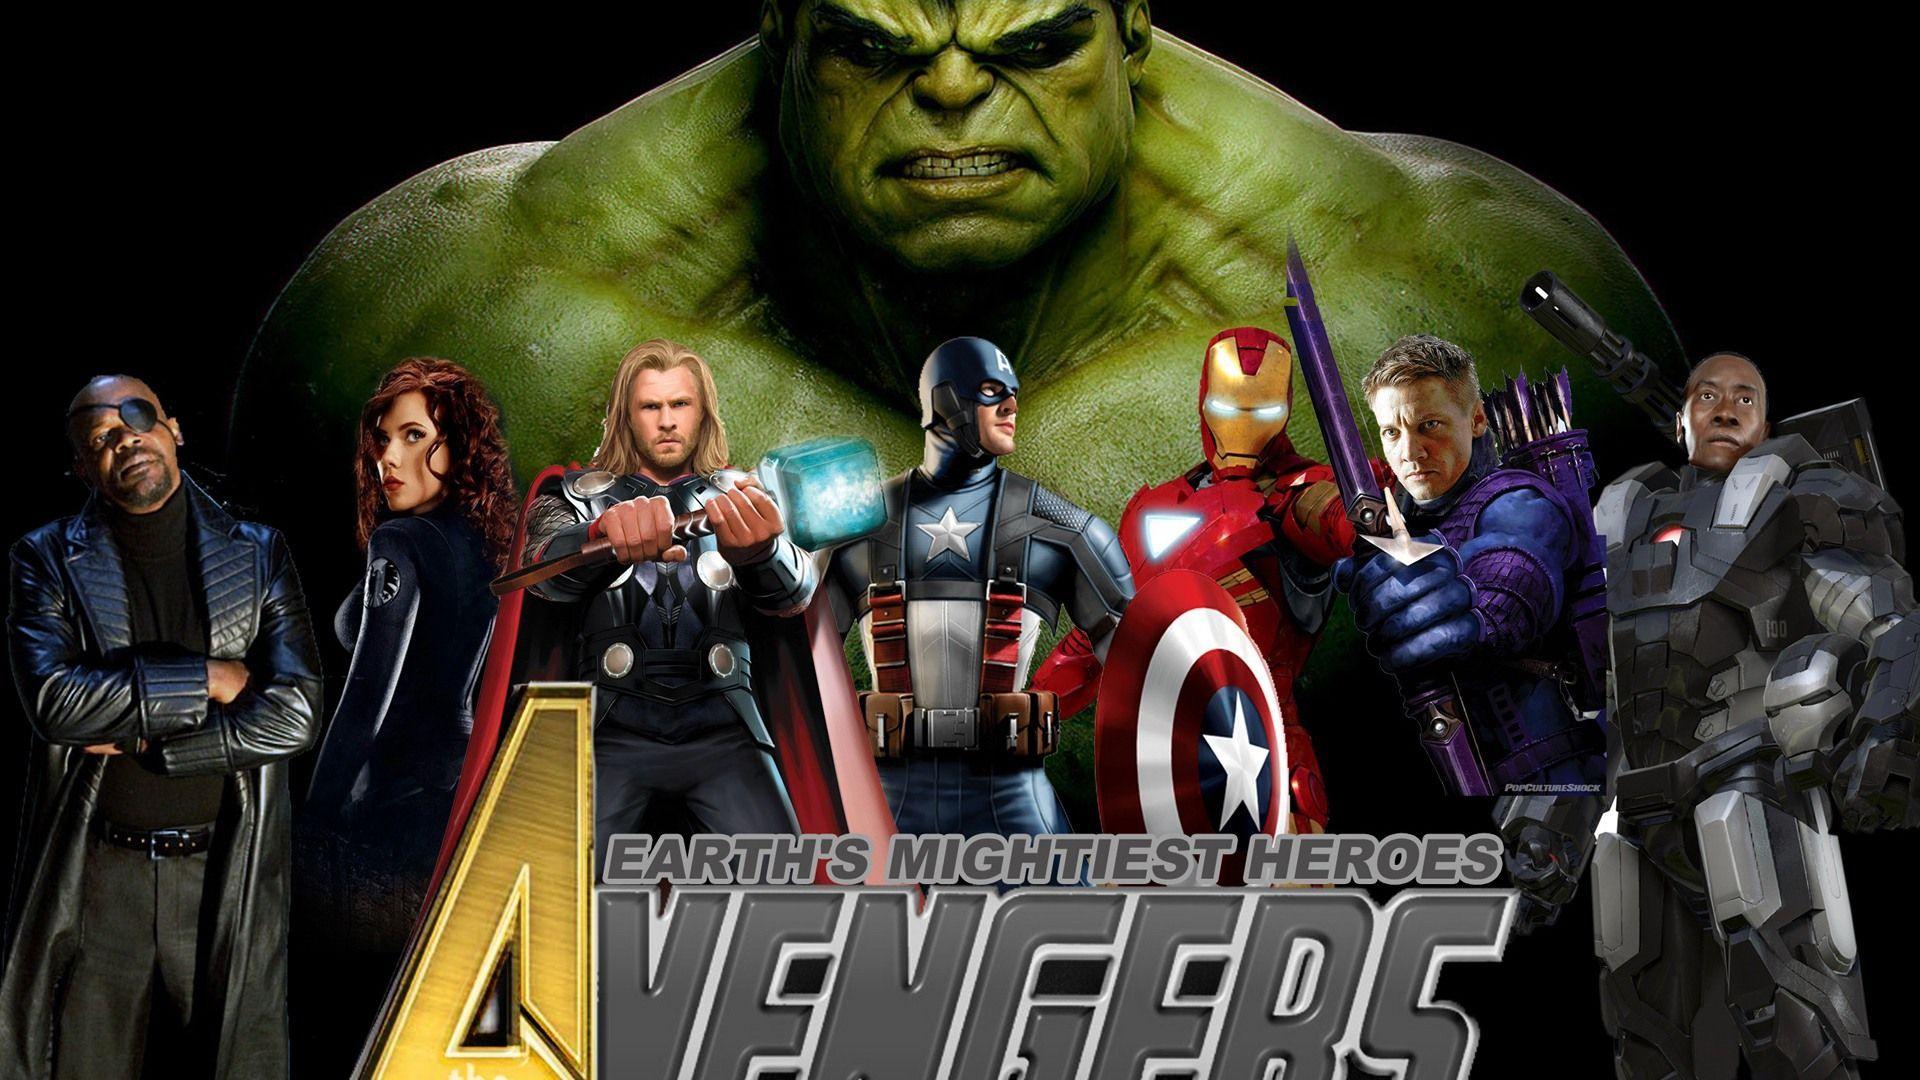 Avengers Poster Wallpaper · Avengers Wallpaper. Best Desktop Background with High Definition for Com. Best superhero movies, Avengers movies, Superhero movies